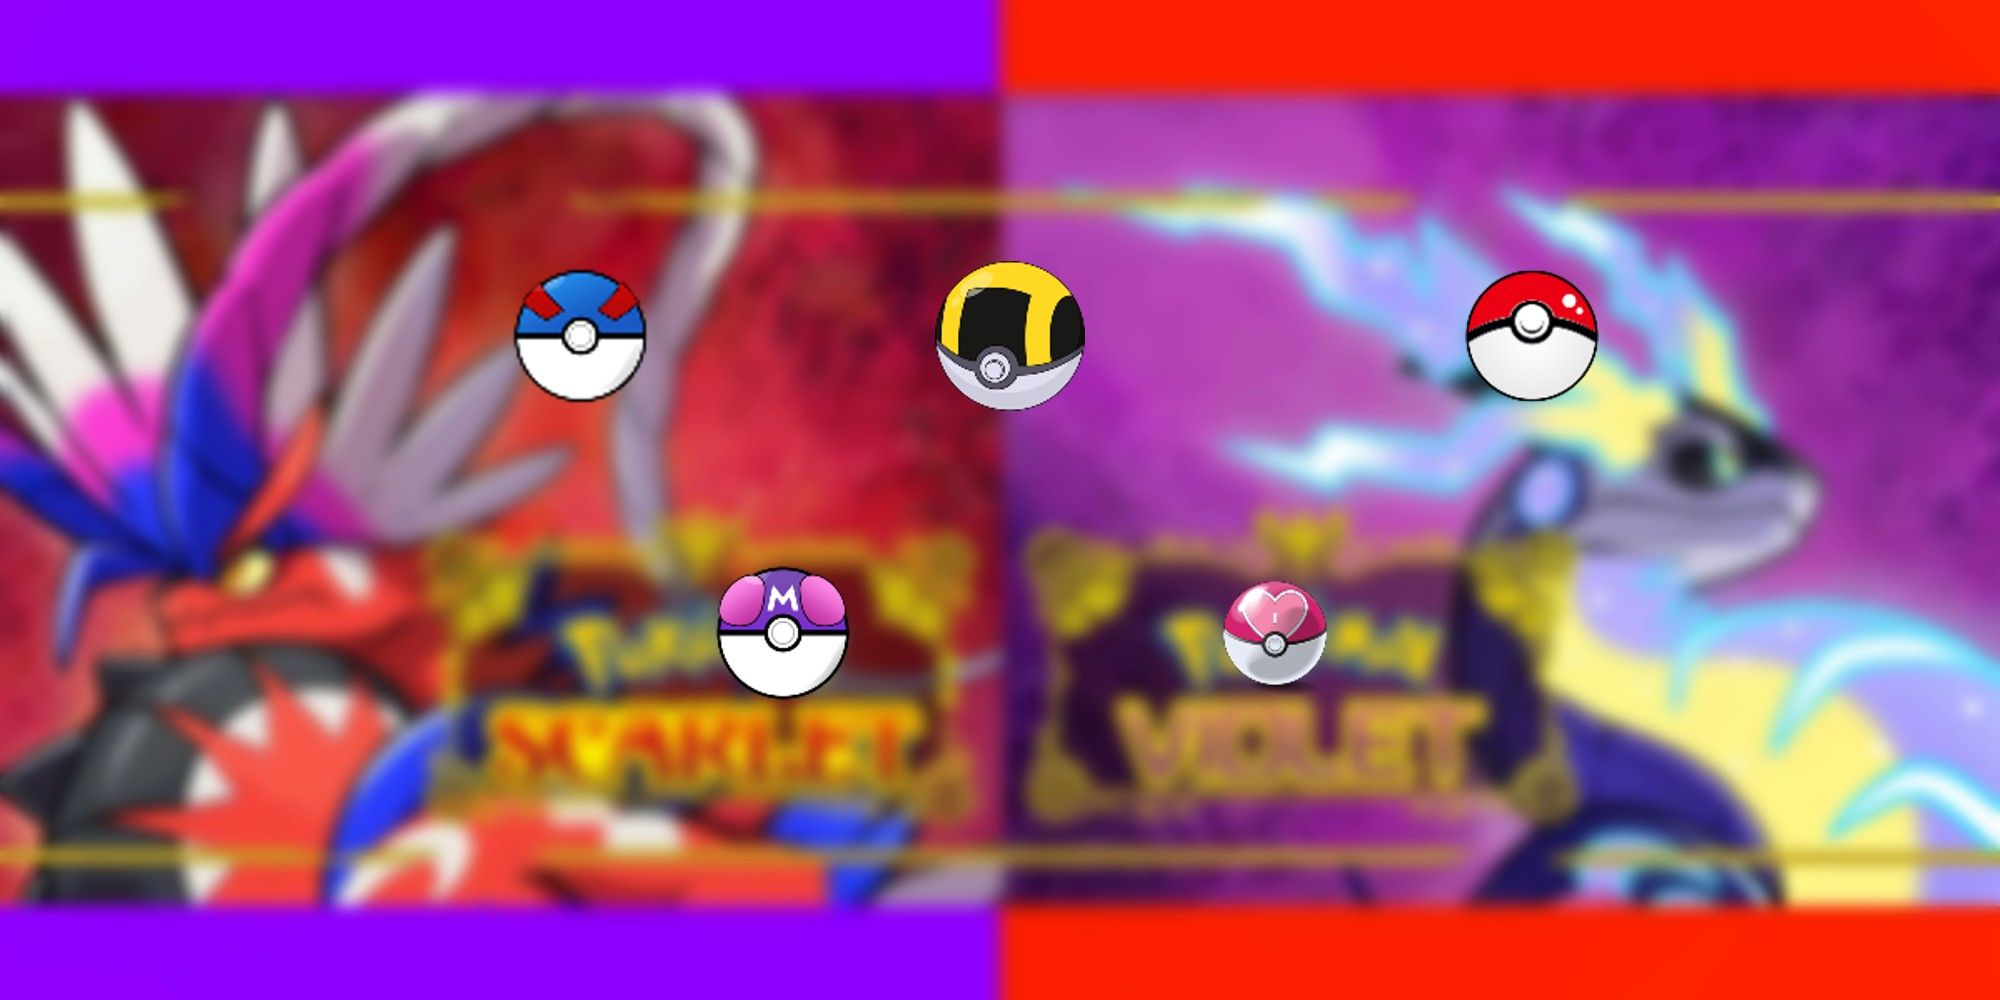 I really wish that it was possible to search in the Boxes via PokéBall type,  even though I know what it would look like . . . : r/PokemonScarletViolet